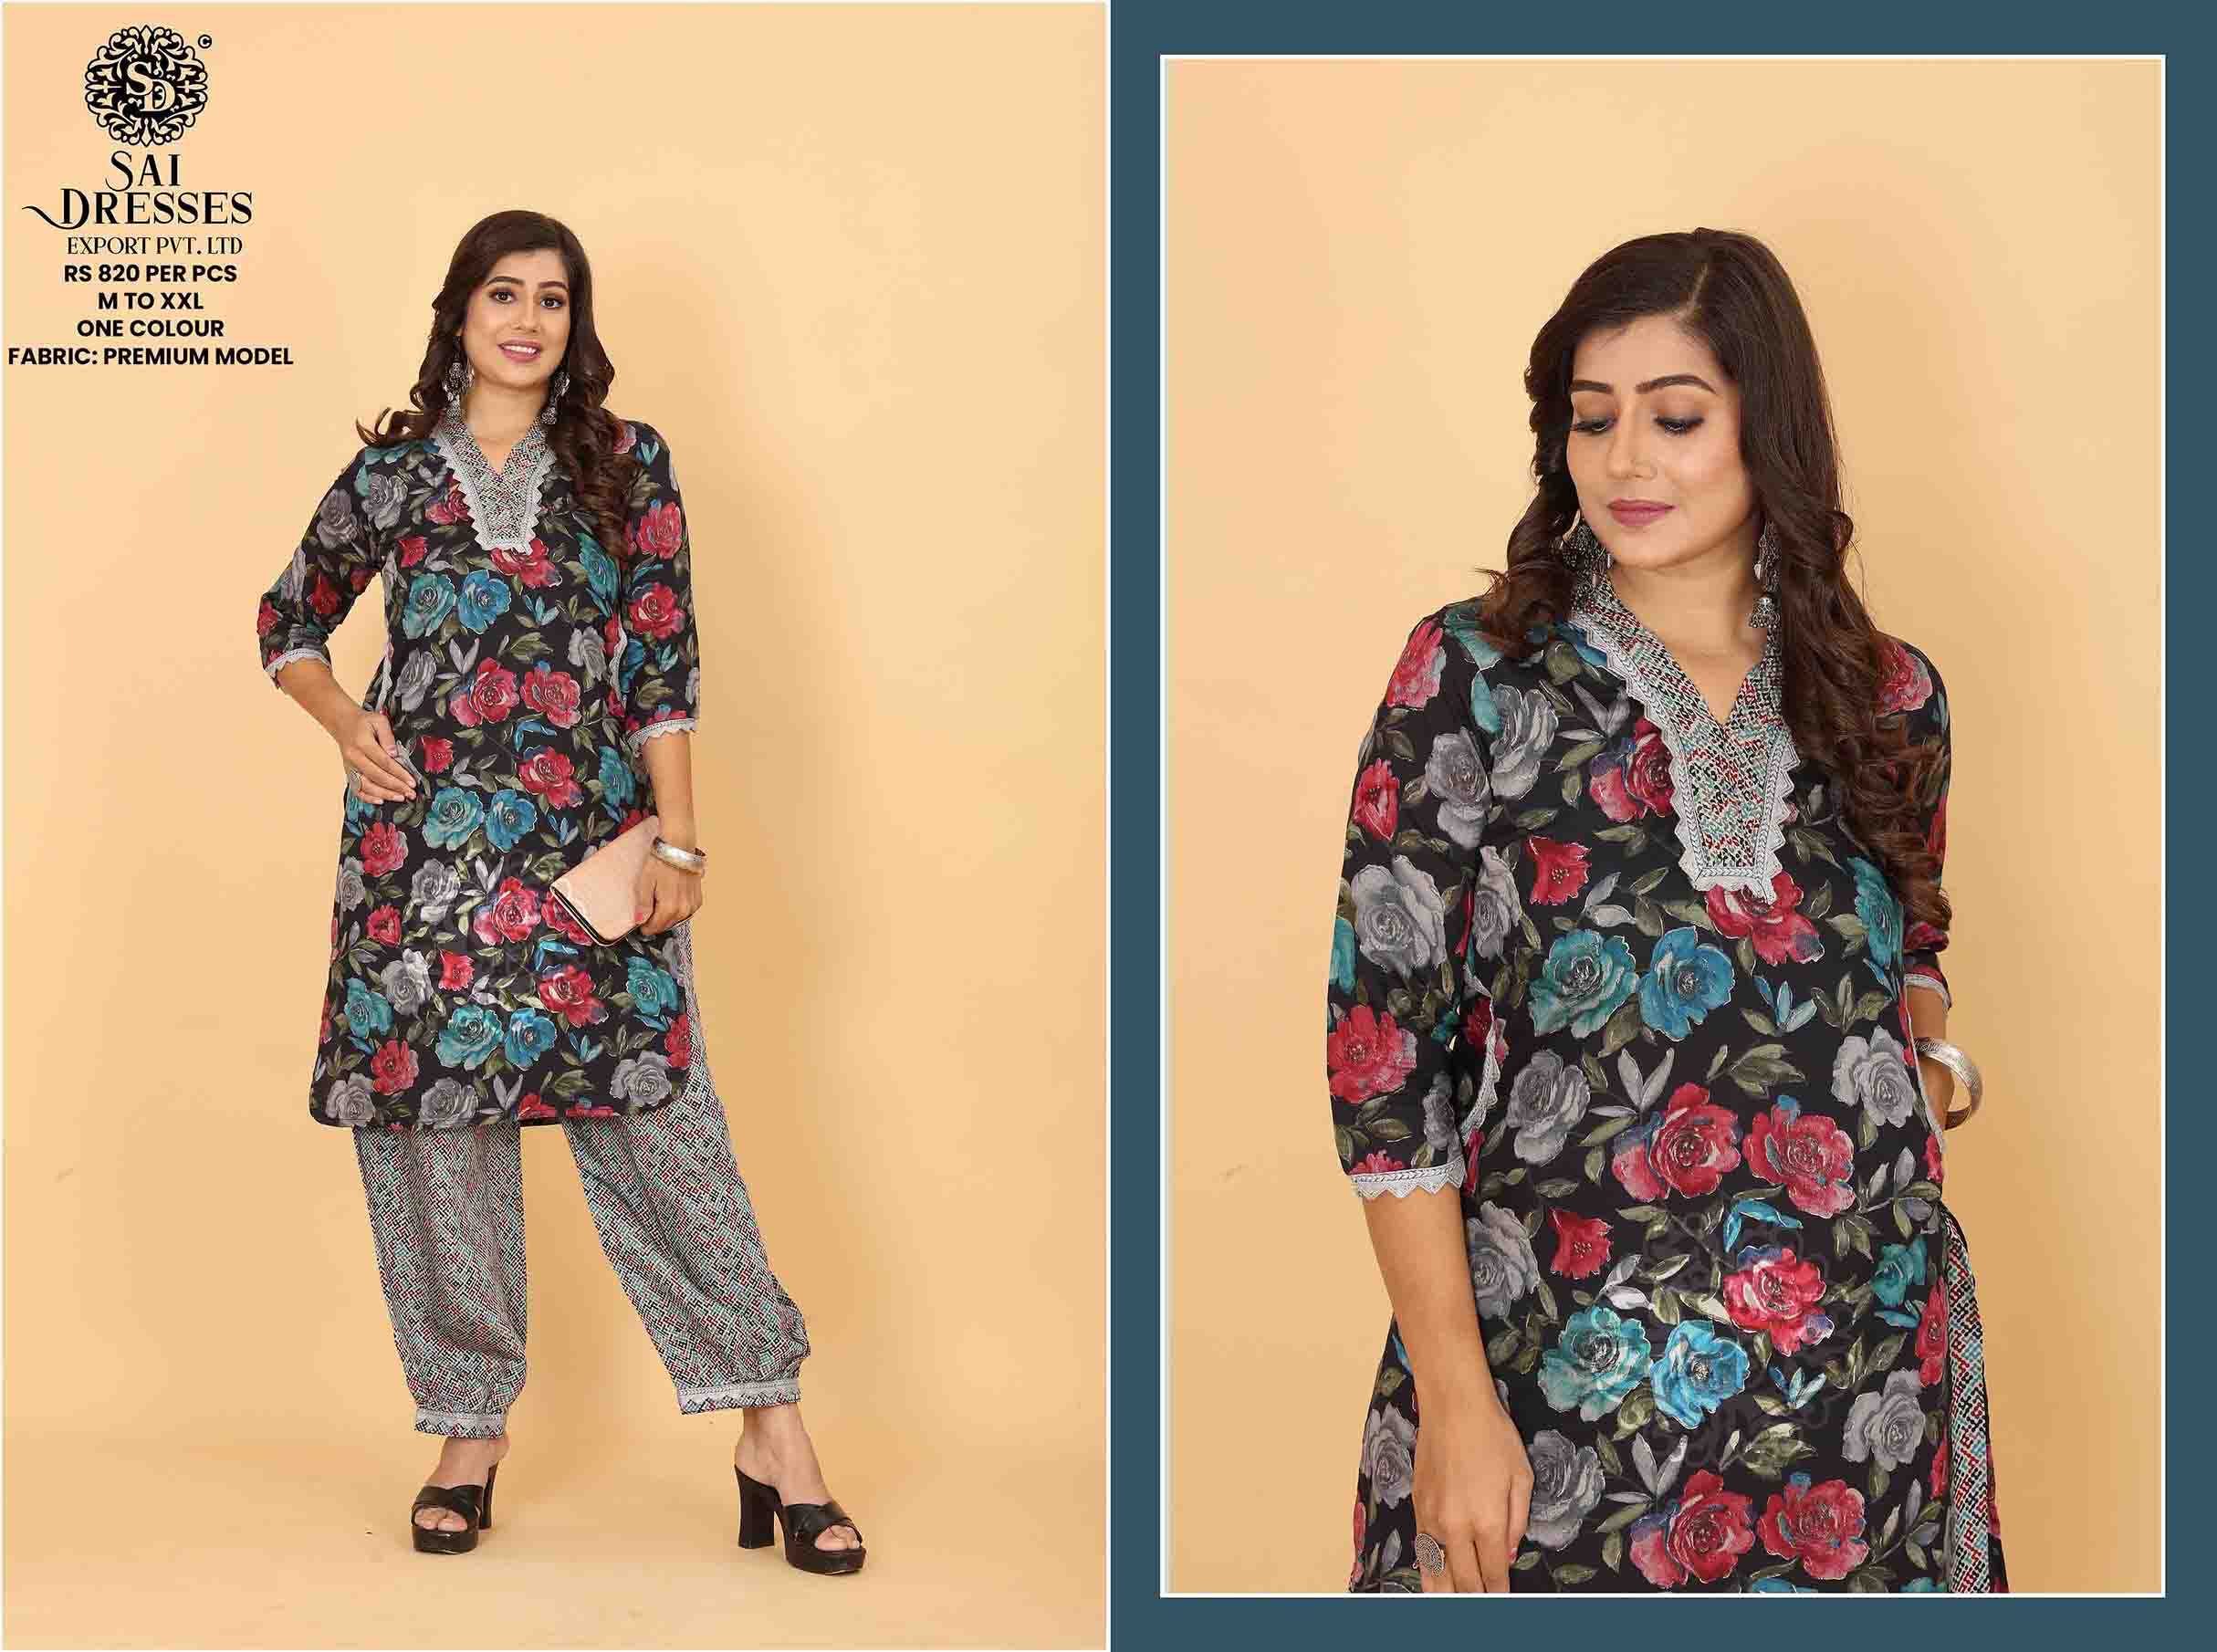 SAI DRESSES PRESENT D.NO SD 5008 READY TO EXCLUSIVE TRENDY WEAR PATHANI KURTA WITH AFGHANI PANT STYLE COMBO COLLECTION IN WHOLESALE RATE IN SURAT